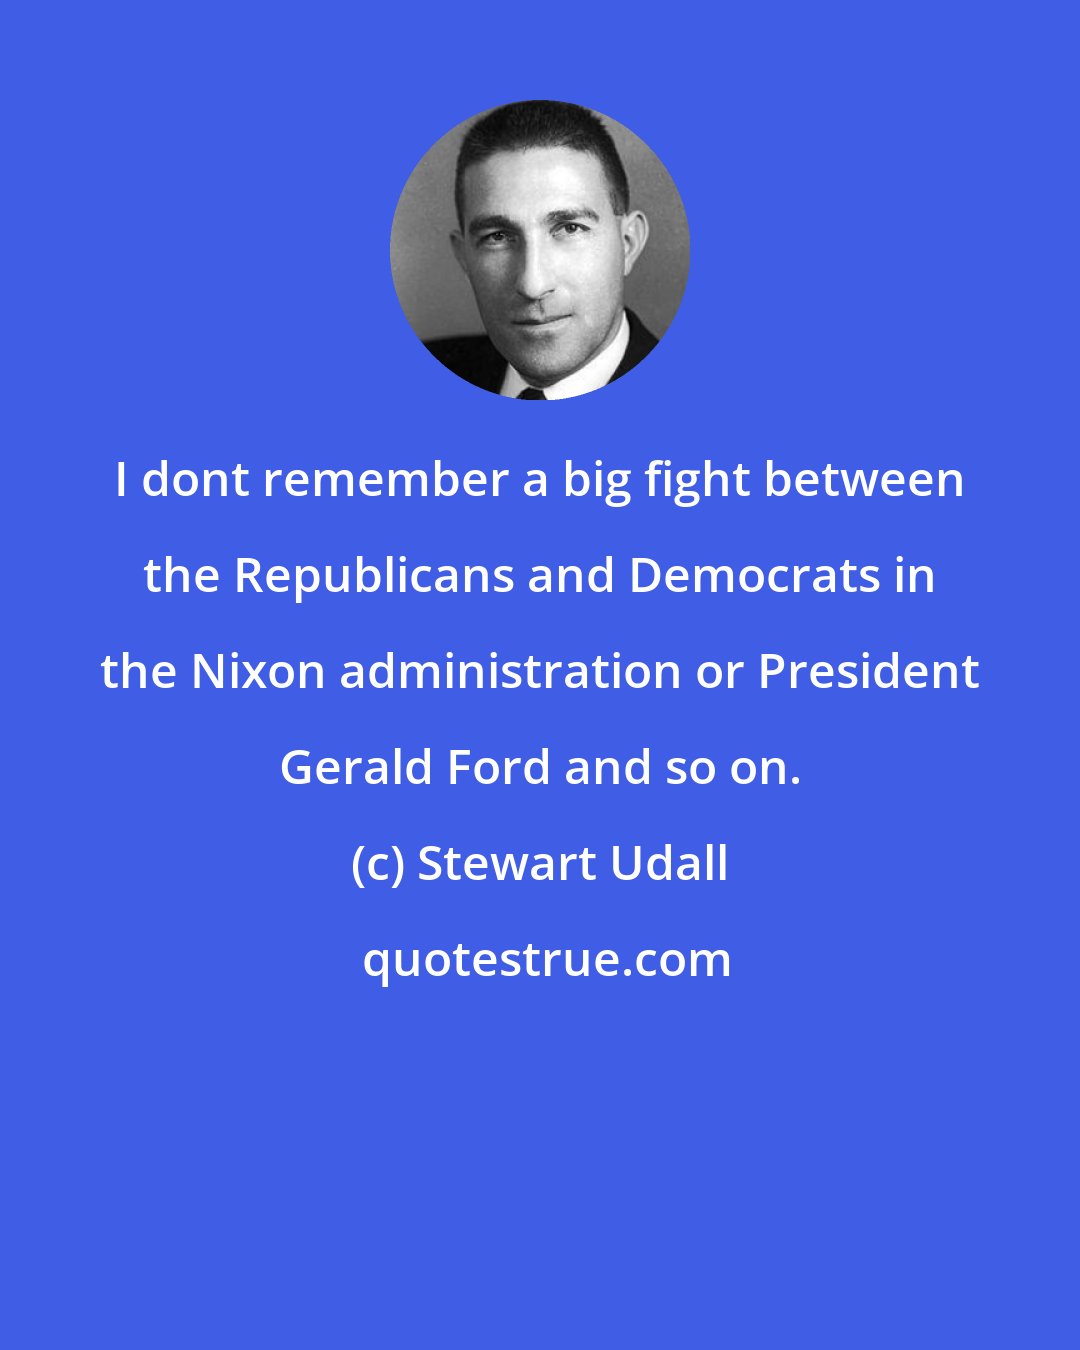 Stewart Udall: I dont remember a big fight between the Republicans and Democrats in the Nixon administration or President Gerald Ford and so on.